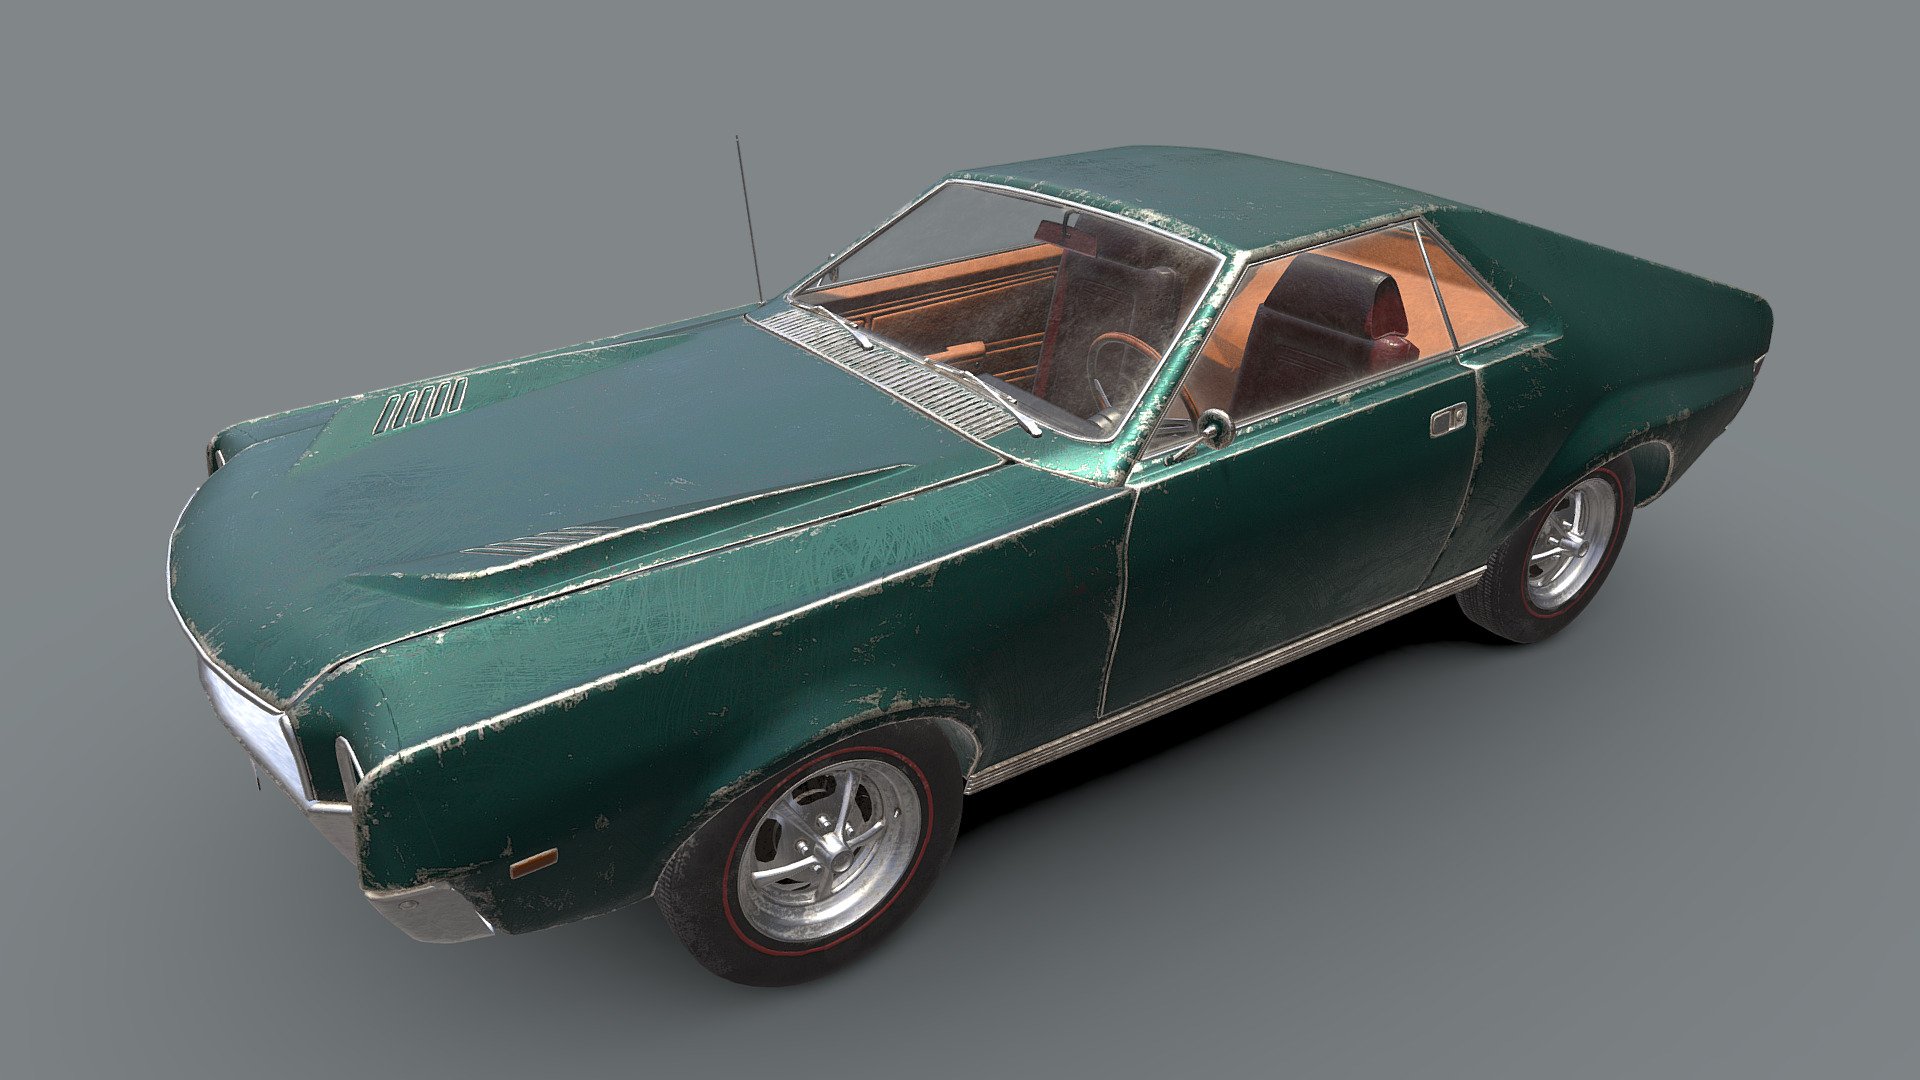 The AMC AMX is a two-seat GT-style muscle car produced by American Motors Corporation from 1968 through 1970.

Texture set included two 4k textures. 4k PBR texture exterior - frame, hoods, wheels, windows and 4k PBR texture interior - dashboard, seats, engine and mechanics. + Variations hood! + Three color themes based green, red and blue pbr texture!

If you need retexturing with wish you can make request in pm!

Detailed Description Info: 3D Model Geometry: Quads/Tris Polygon Count: 80 980 Vertice Count: 86 232 Textures: Yes Materials: No Rigged: No Animated: No UV Mapped: Yes Unwrapped UV's: Yes Non-Overlapping Textures formats: PBR textures include Diffuse, Roughness, Metallic, Normal and Opacity maps in 4K resolution PNG - AMC AMX 1968 - 3D model by VladRad 3d model